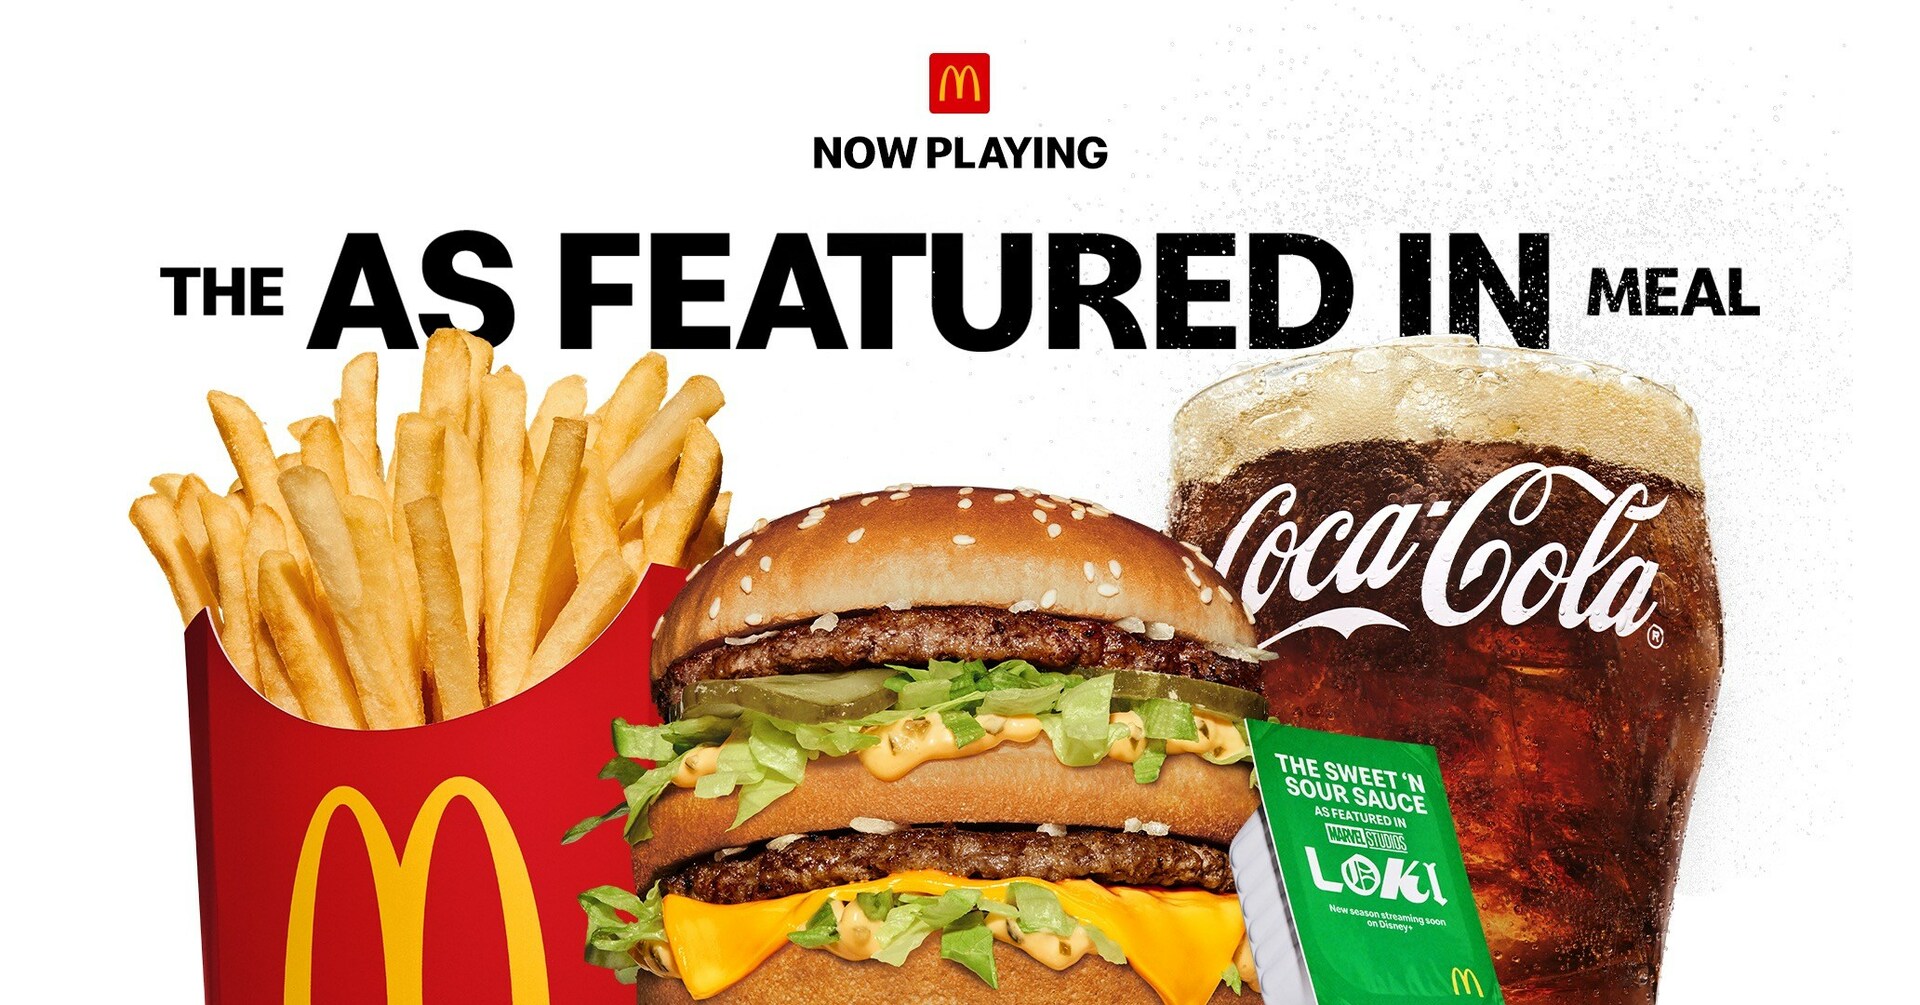 McDonald's Presents the As Featured In Meal